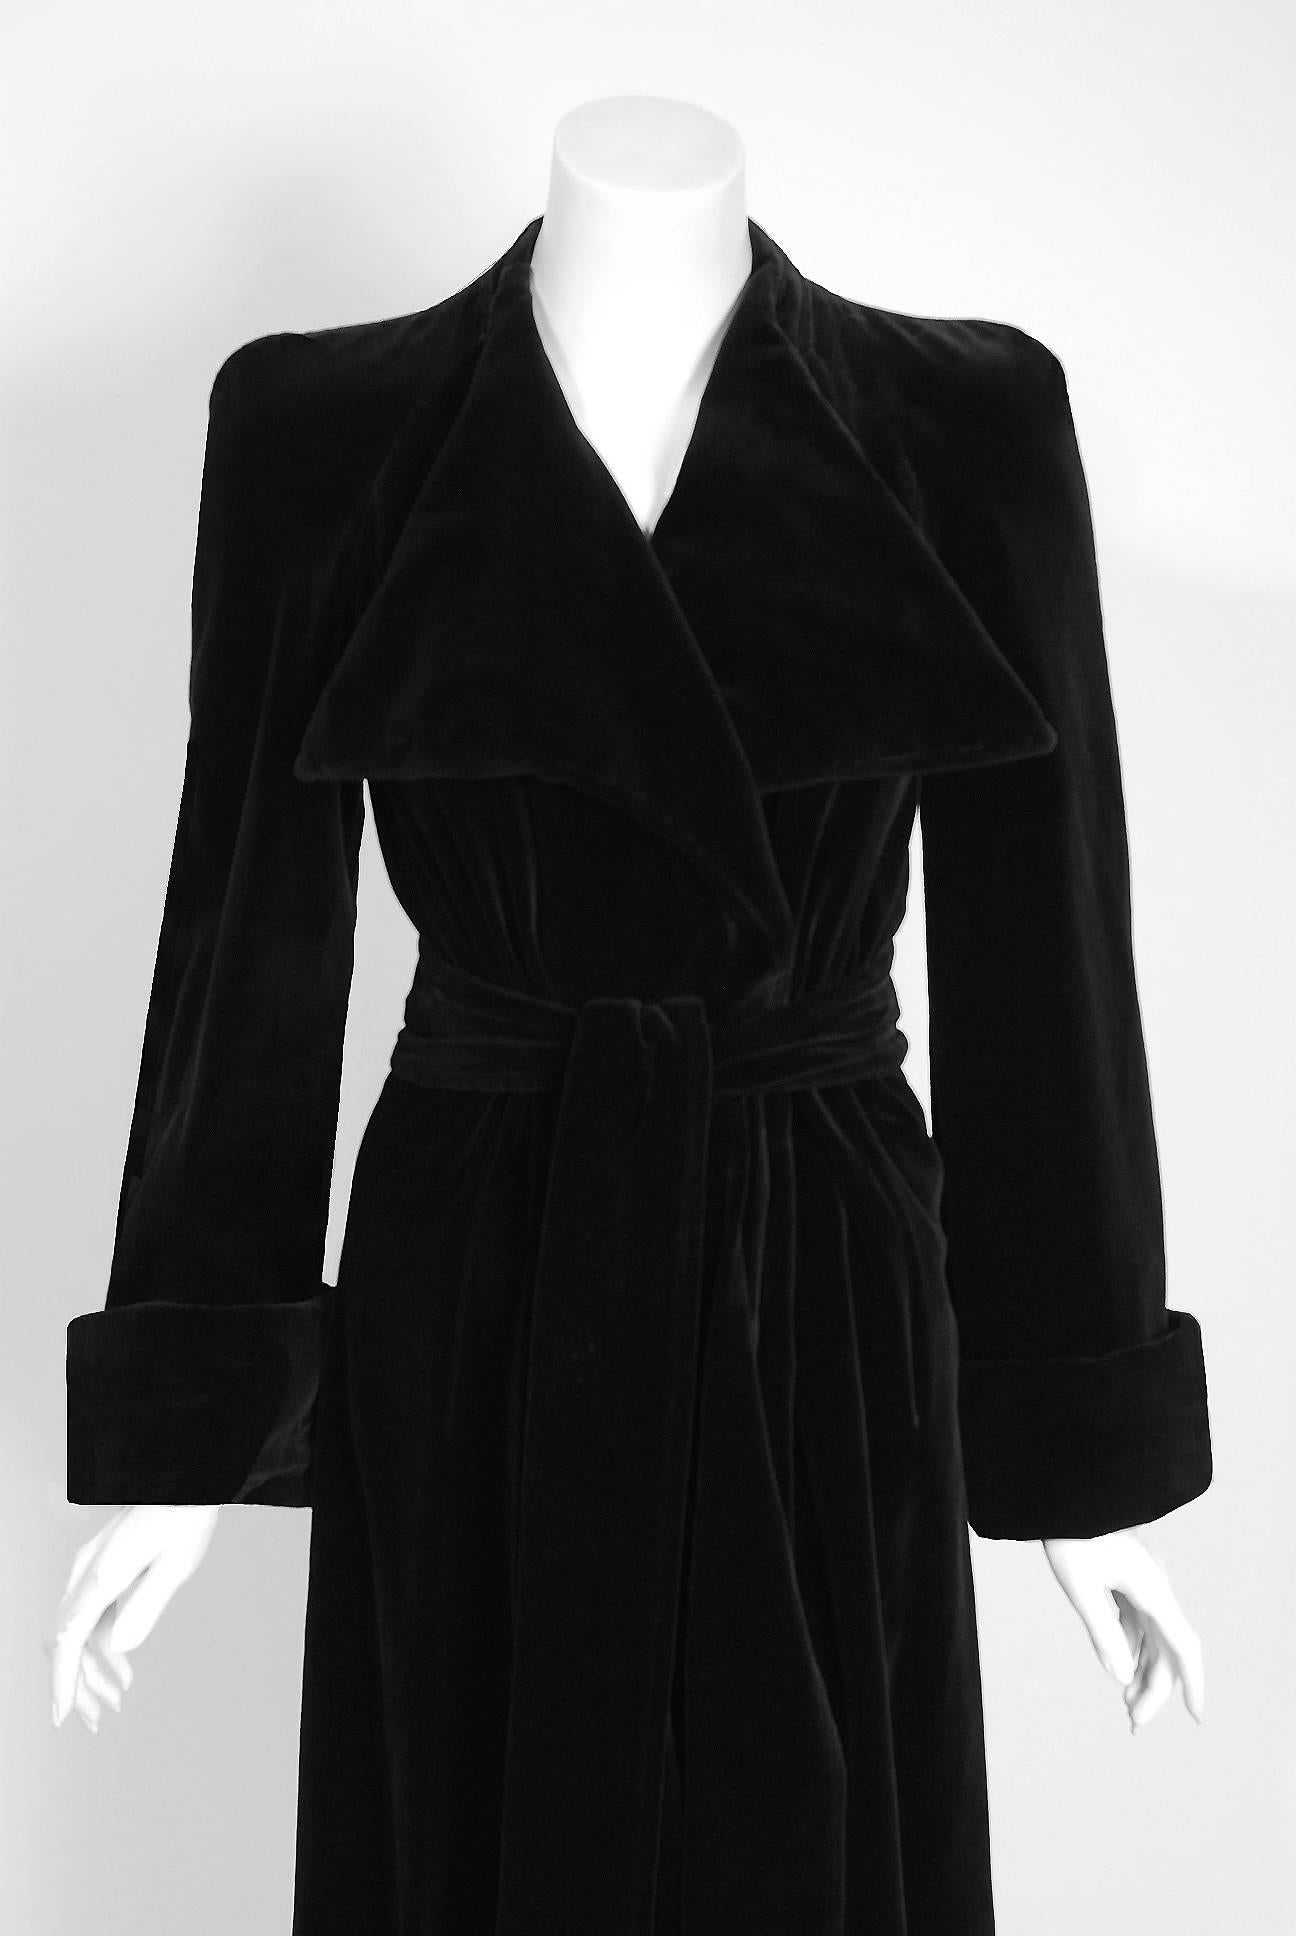 If you were an "It Girl" in London during the 1960's and 1970's, Biba is where you would have shopped. This beautiful black maxi trench coat is a perfect example of the brand's genius. It is fashioned from soft velvet with all the classic